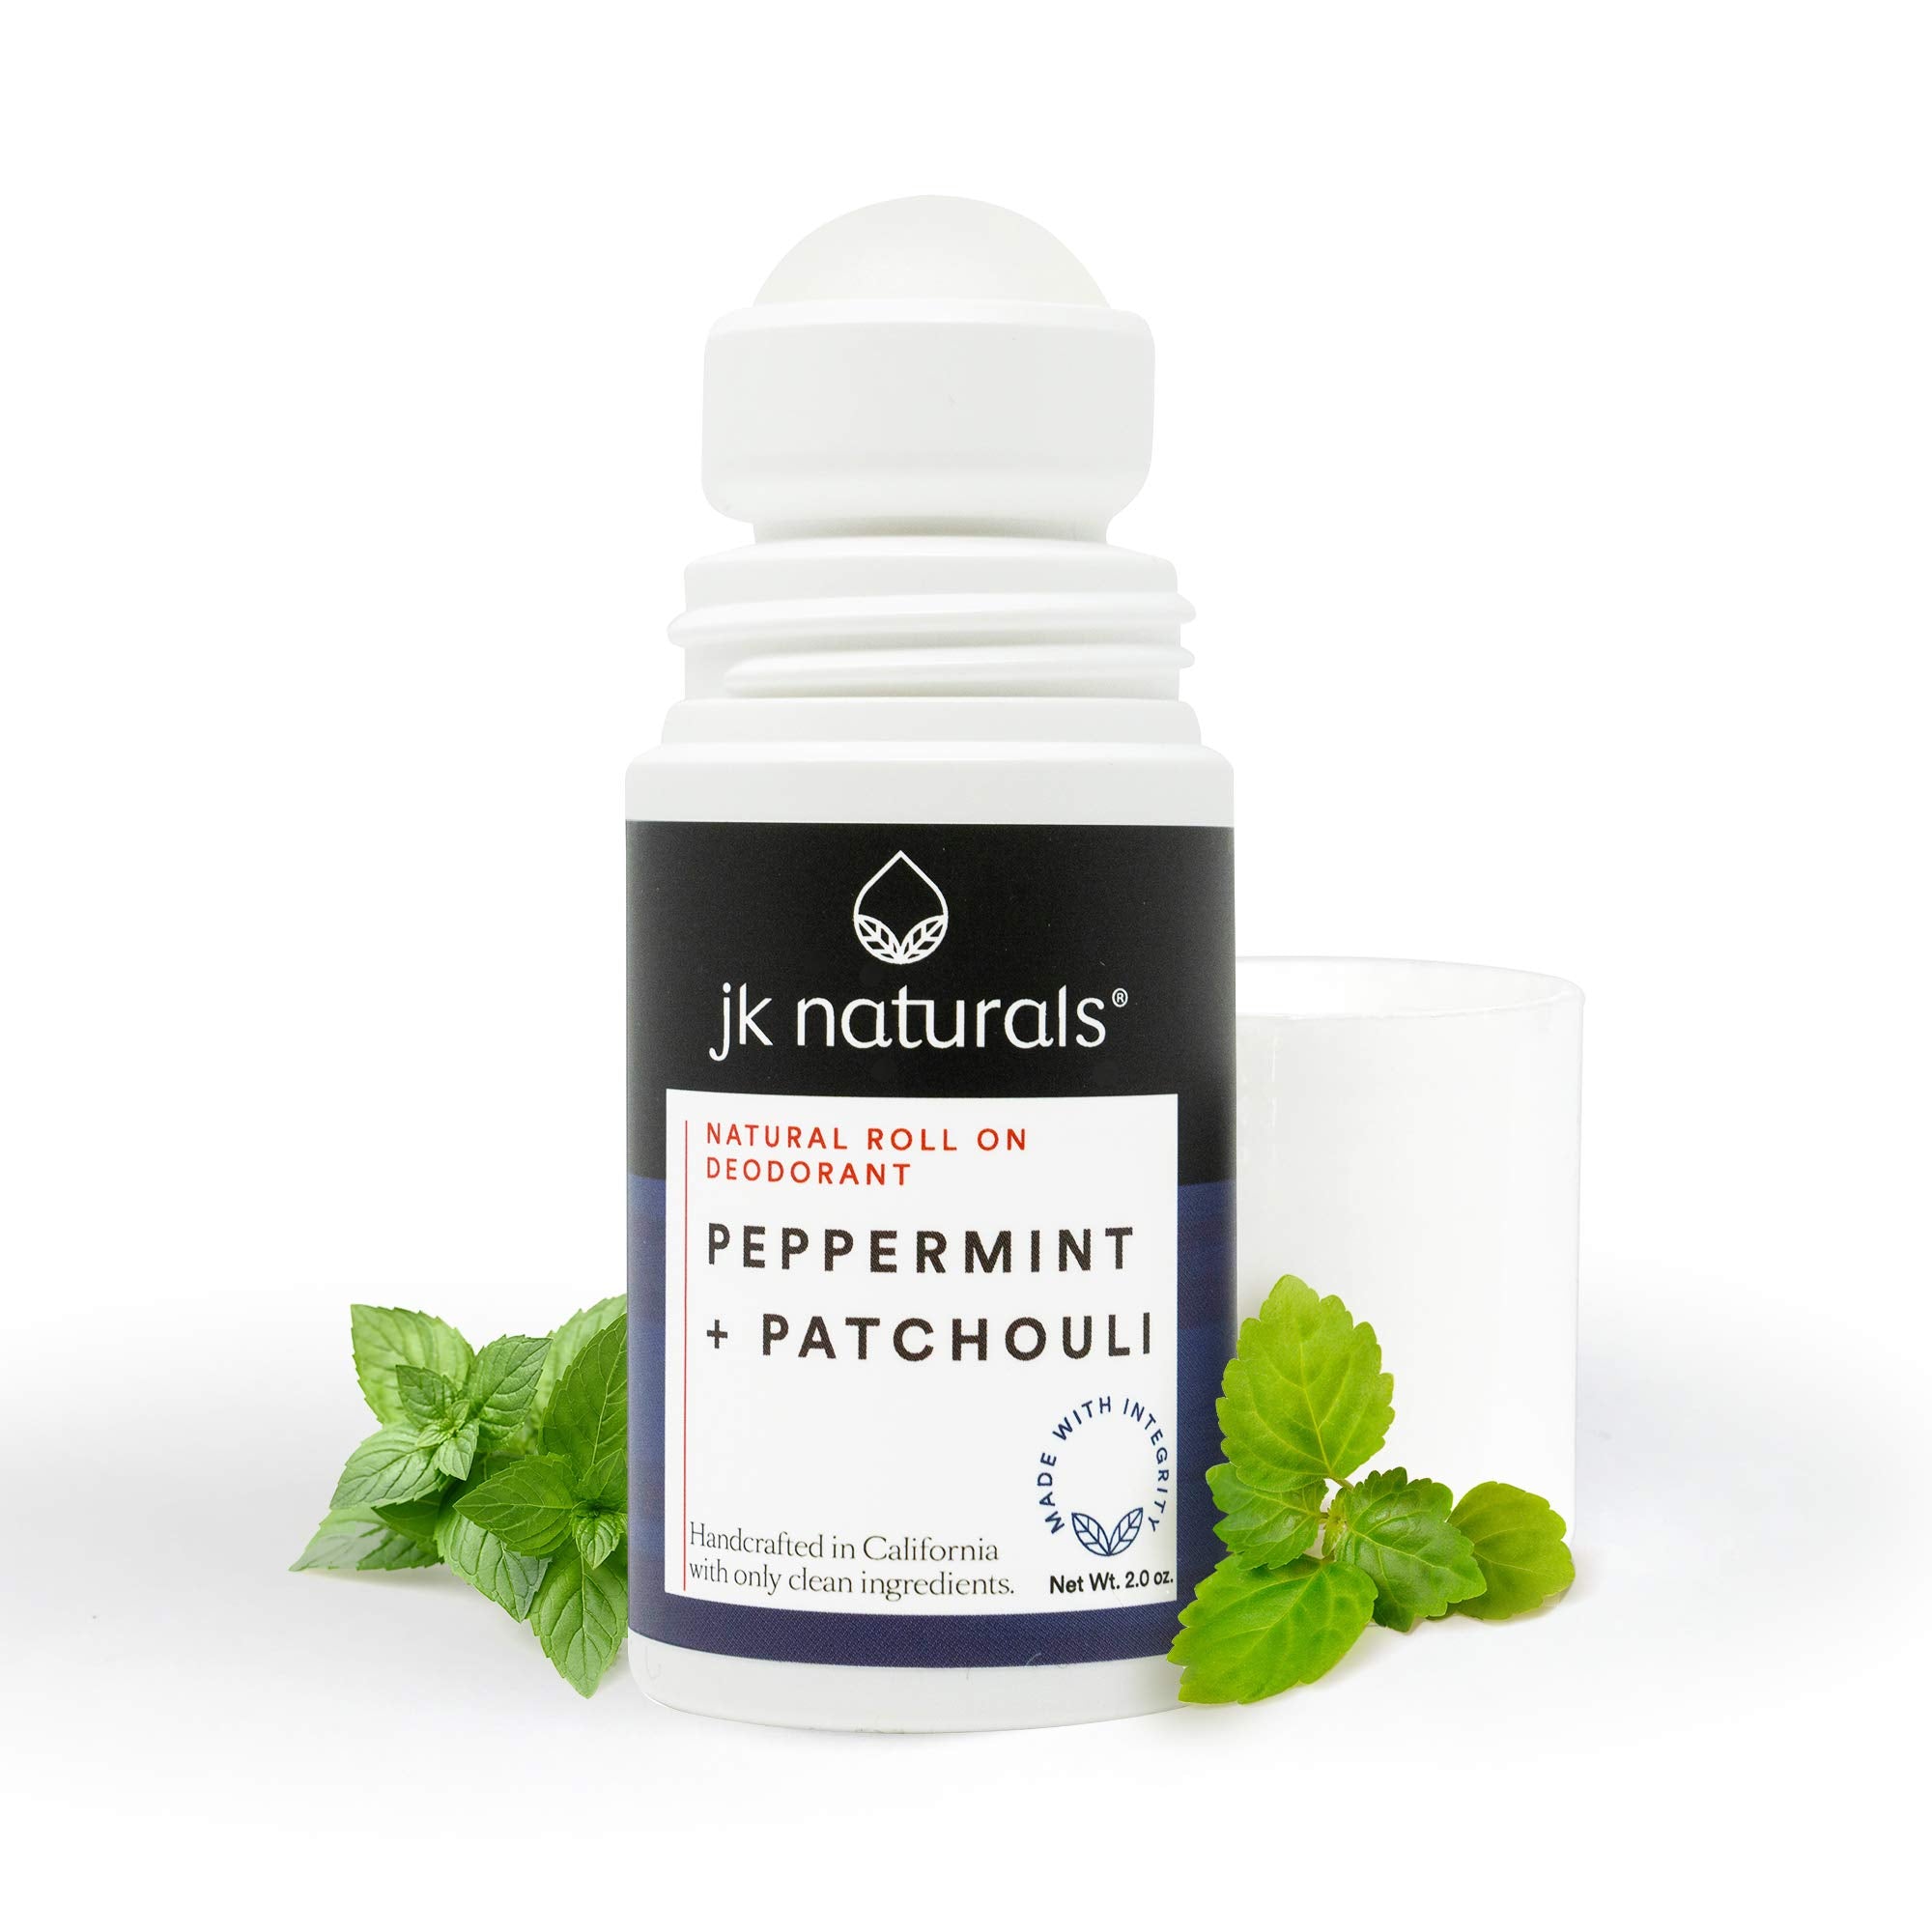 Best Natural Roll On Deodorant | Peppermint + Patchouli